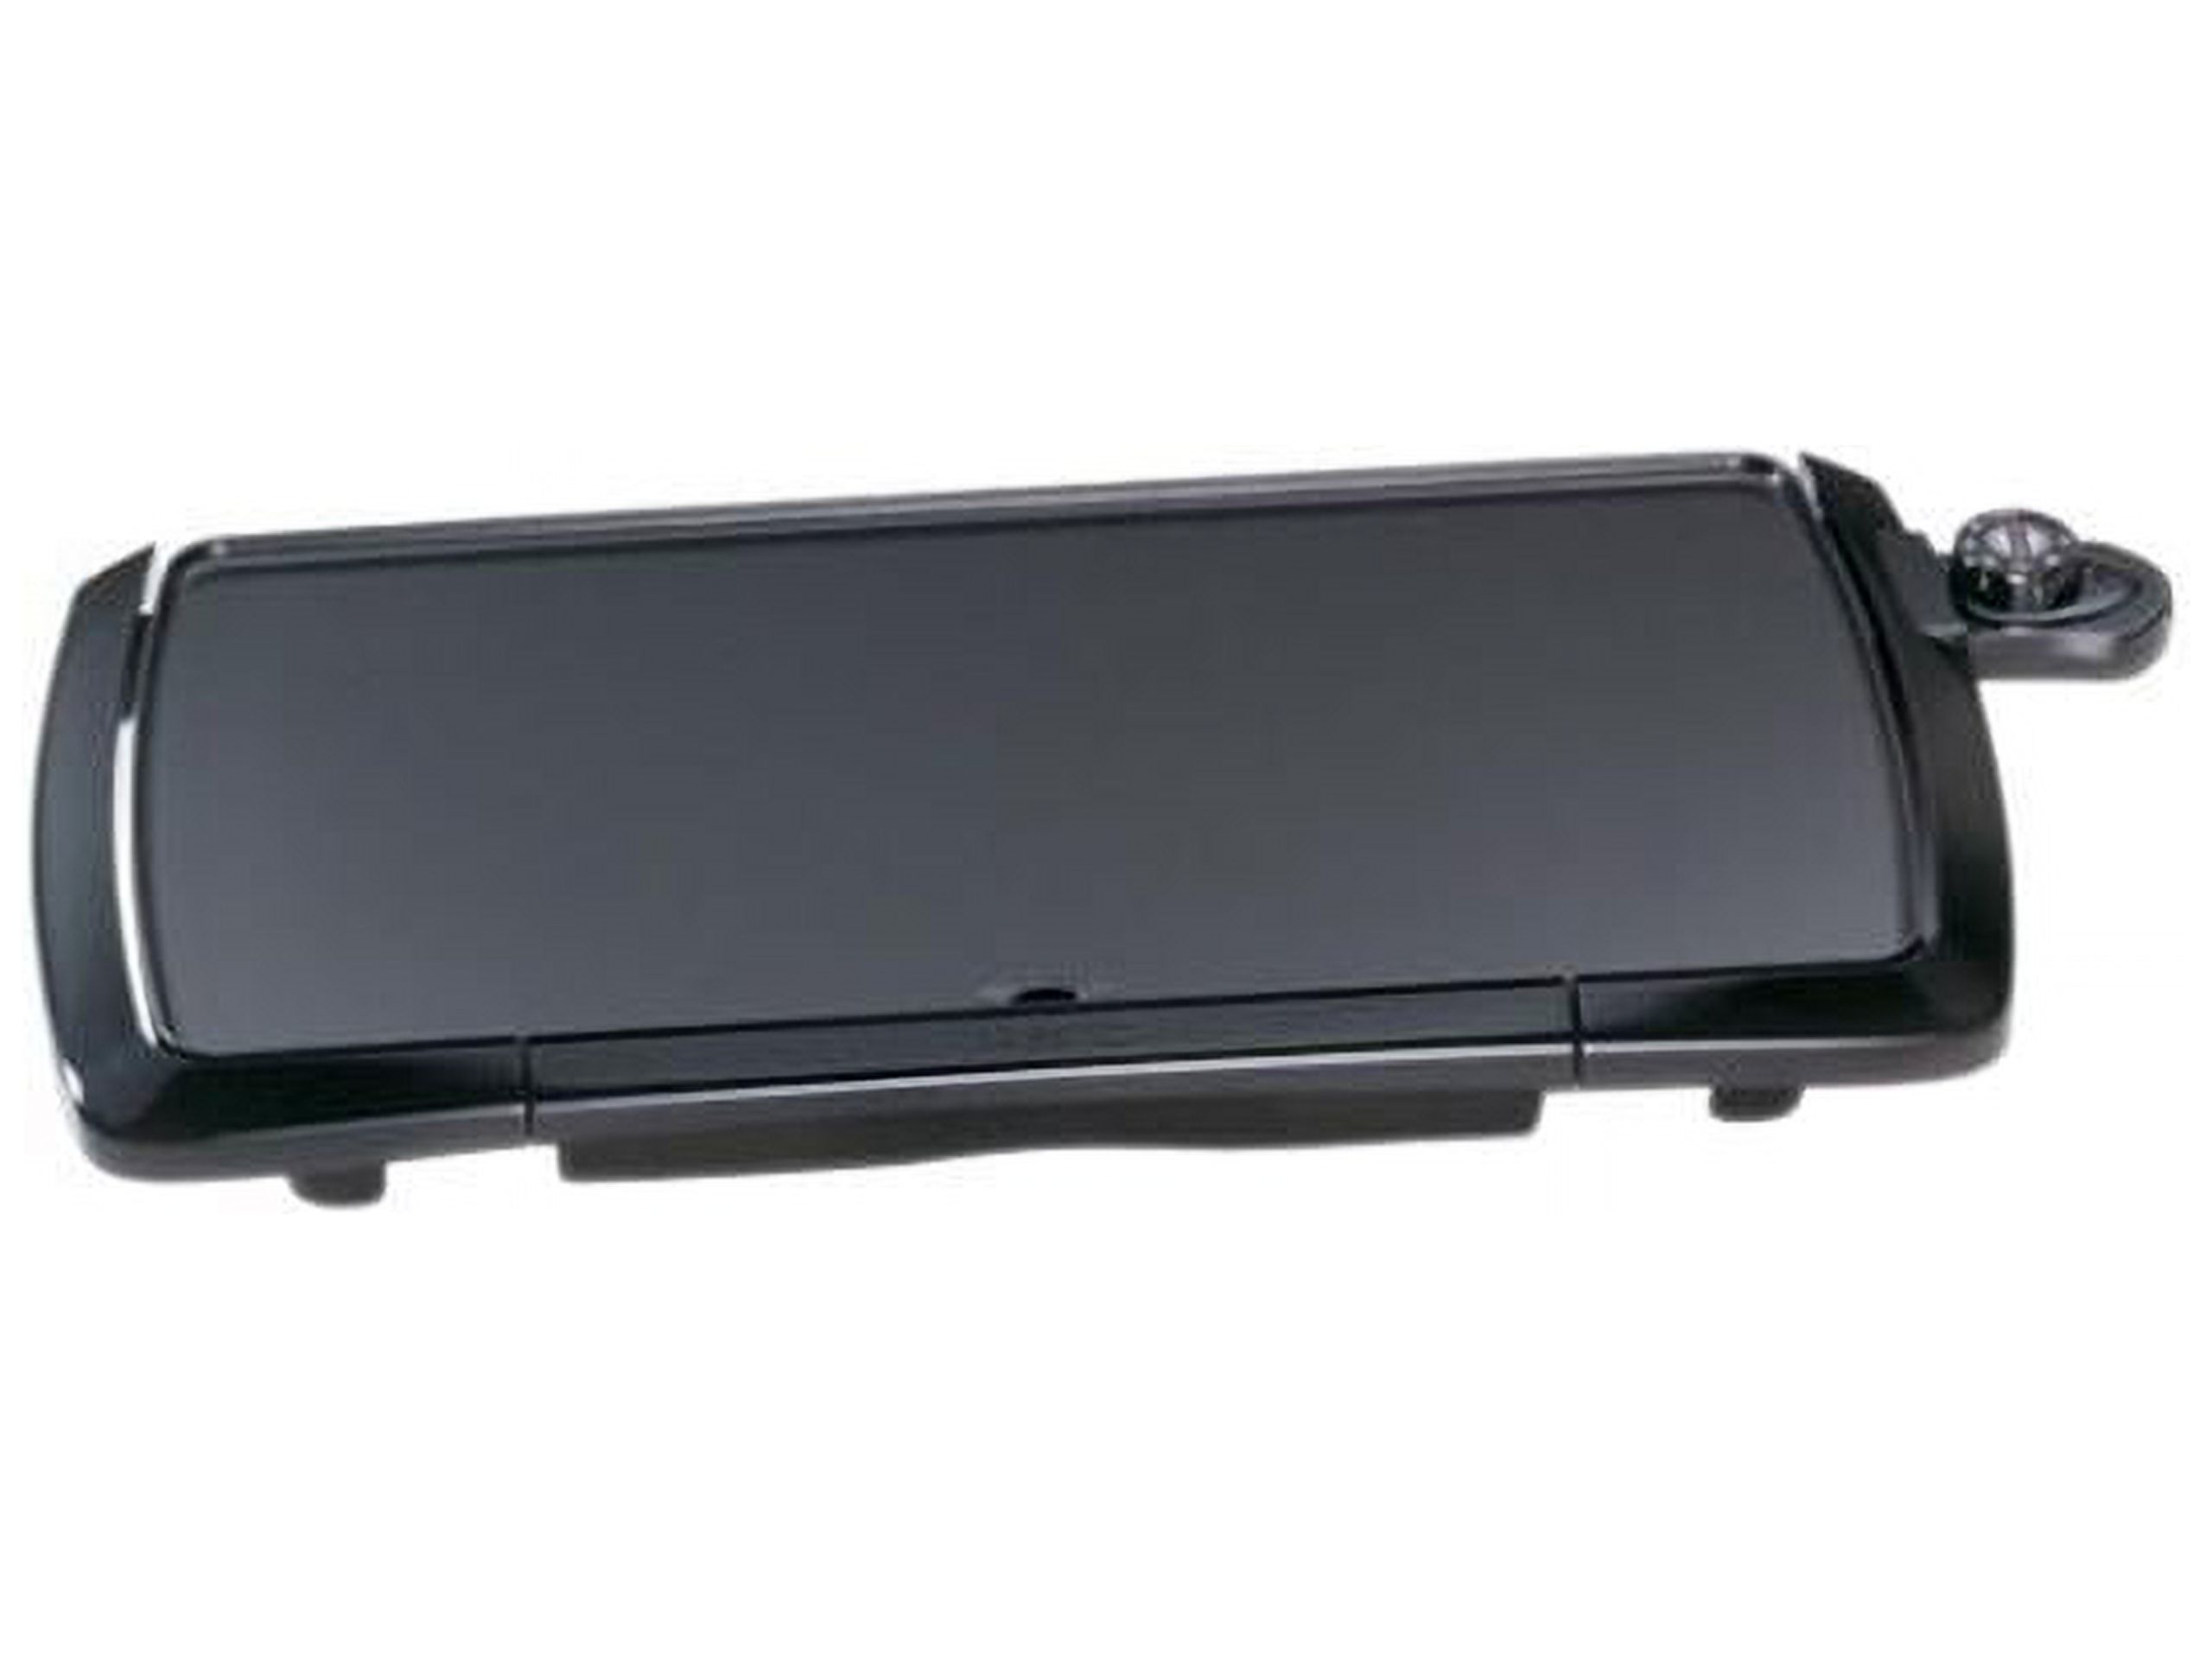 Presto 20"Cool-Touch Electric Griddle 07030 Black - image 1 of 2